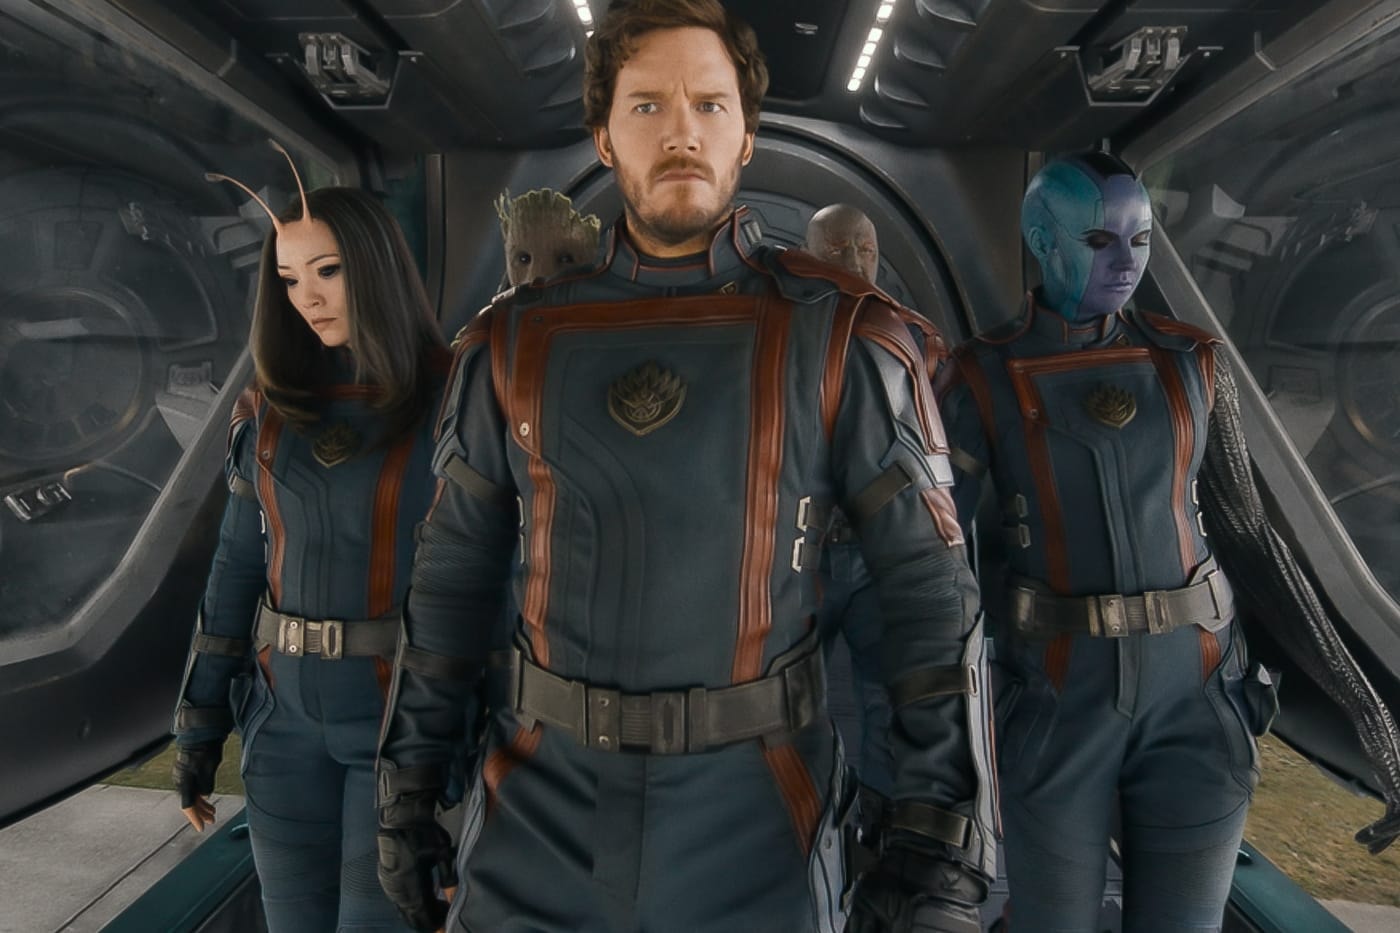 Guardians of the Galaxy volume 3 earns 48 million USD Opening Day